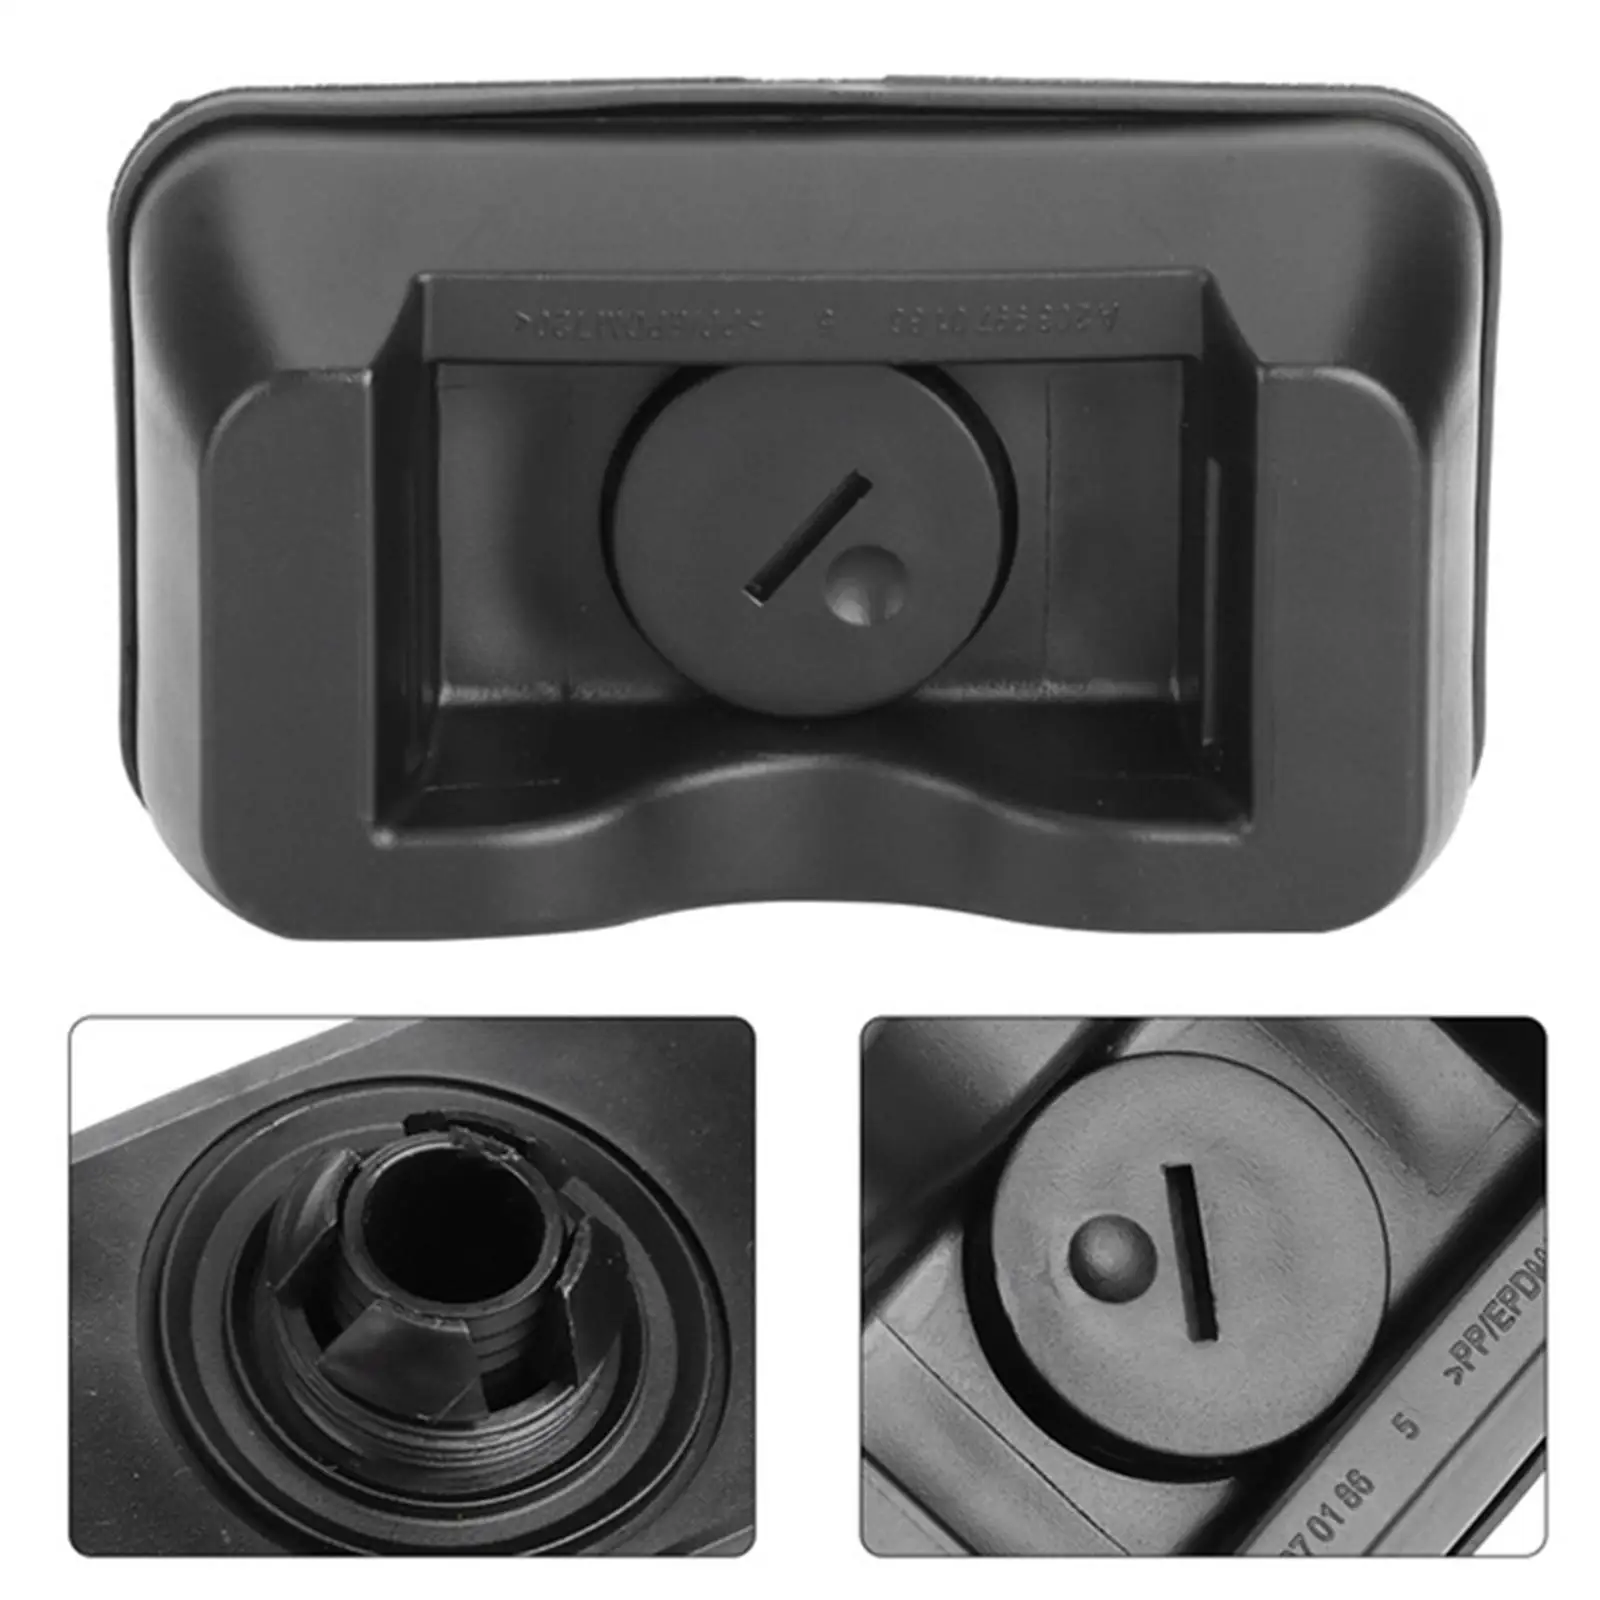 Jack Point Pad 2039970186 A2039970186 Car Accessories for Mercedes-benz S Class C215 CLS C219 E Class W211 Replaces